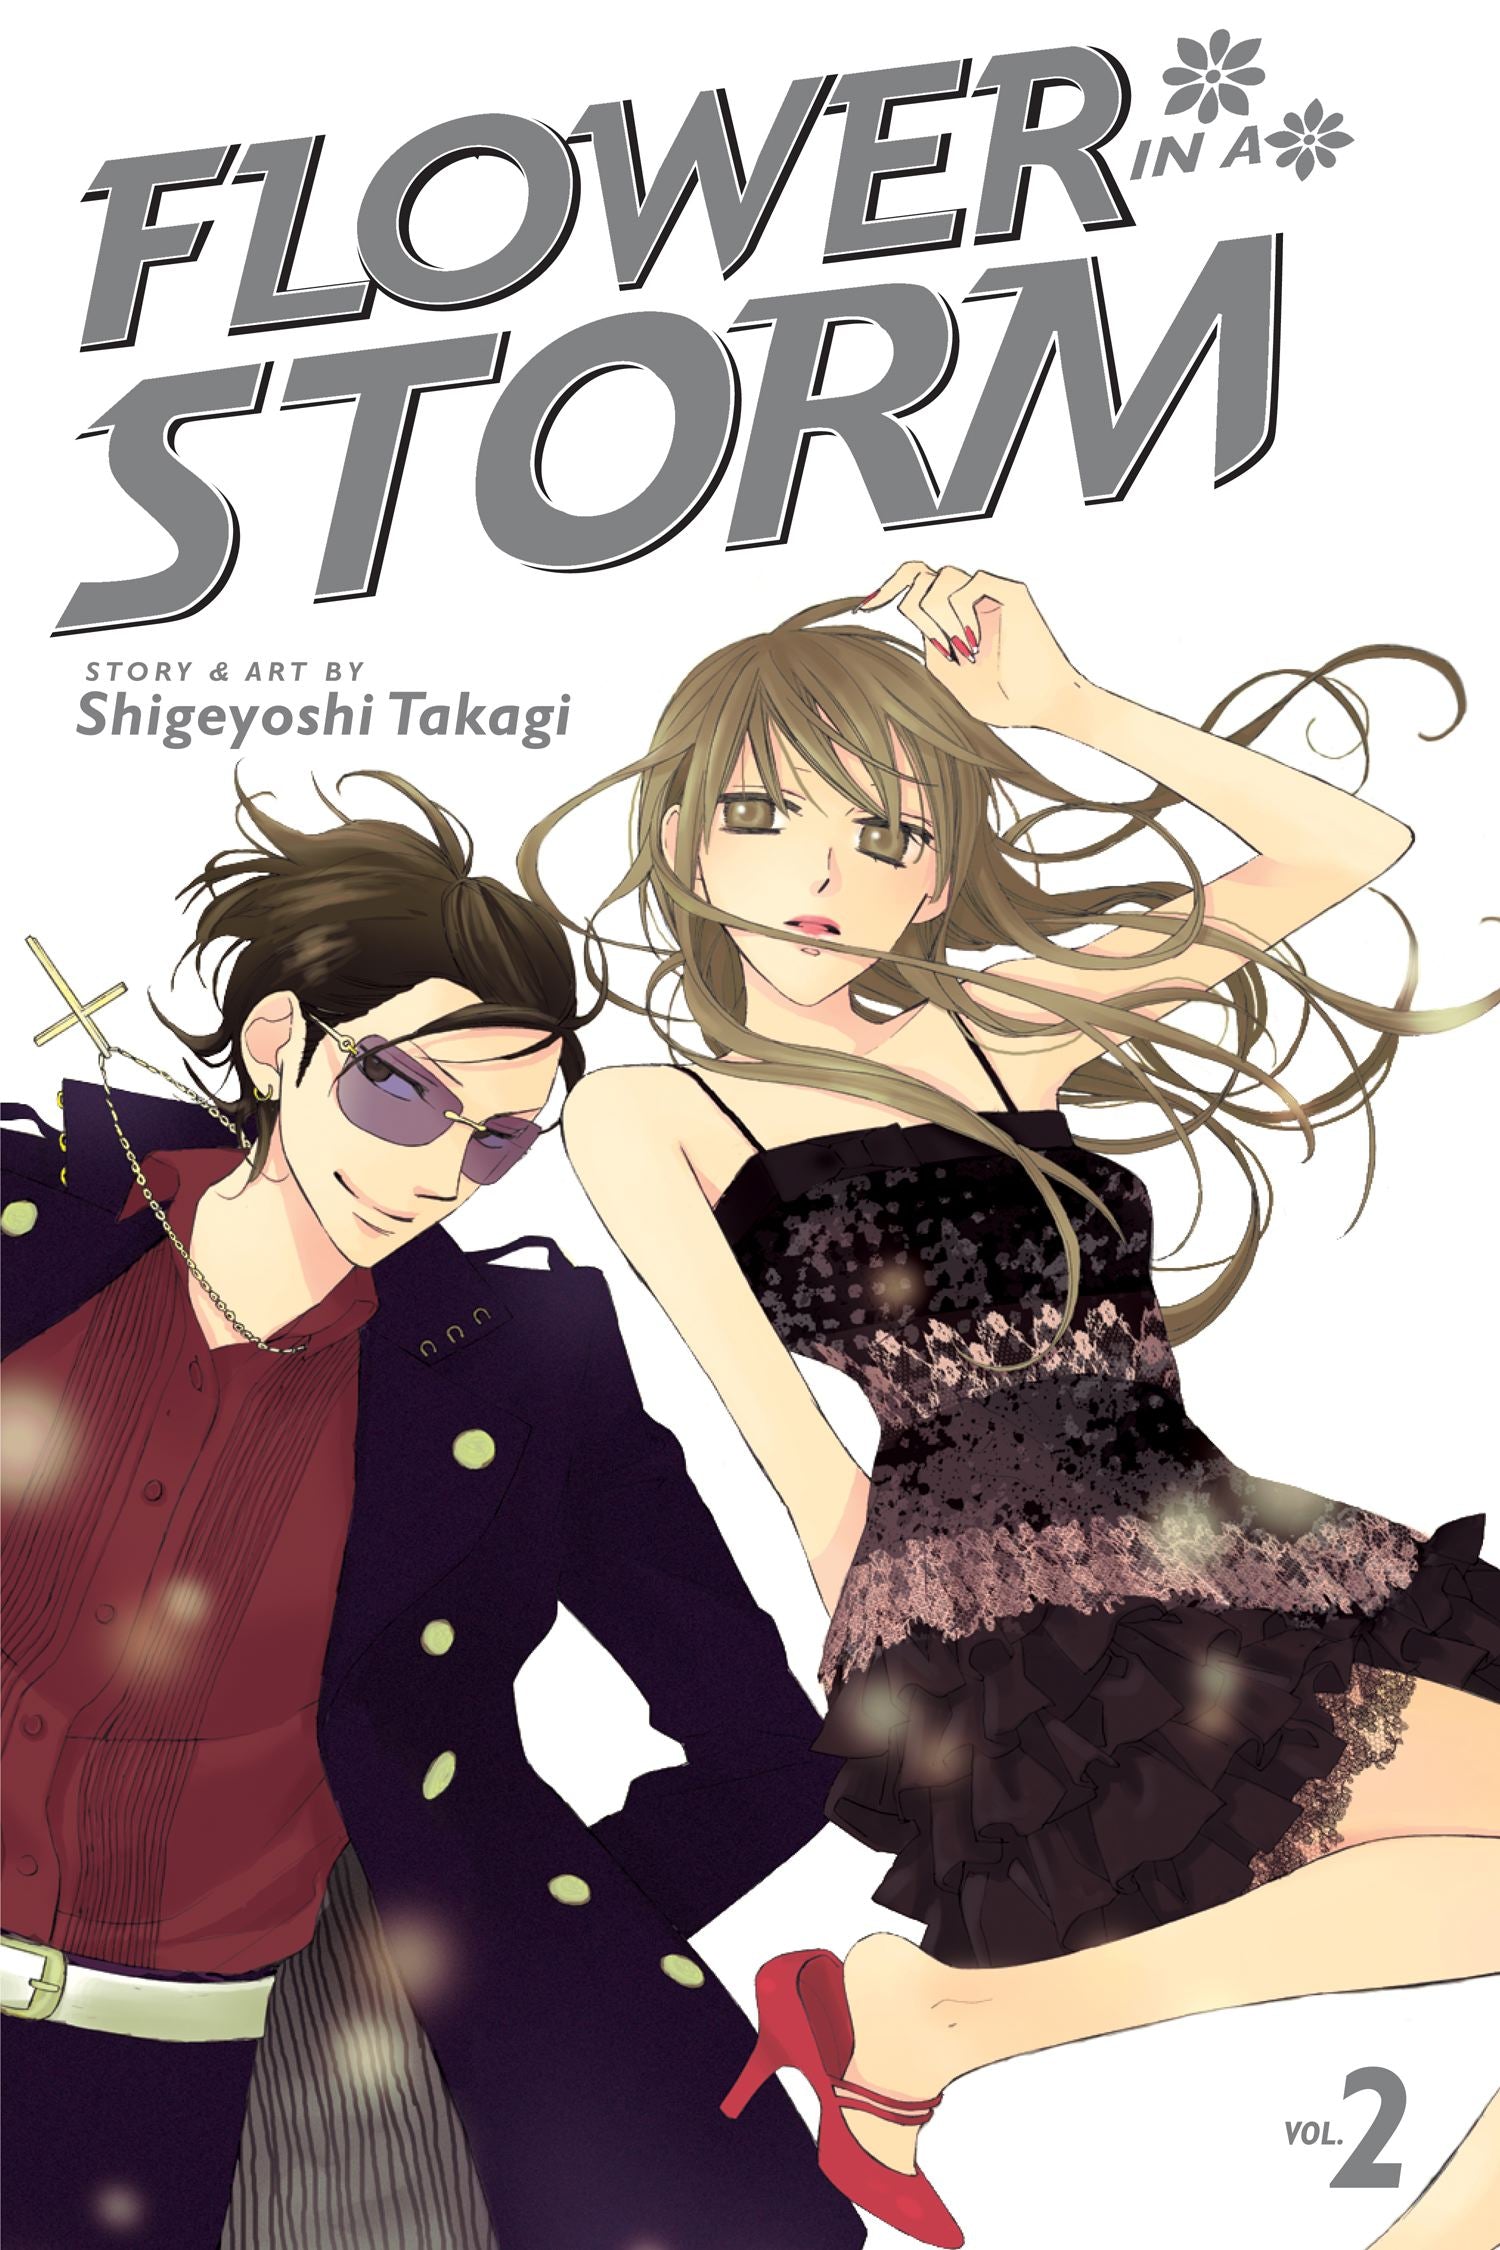 Flower in a Storm, Vol. 2